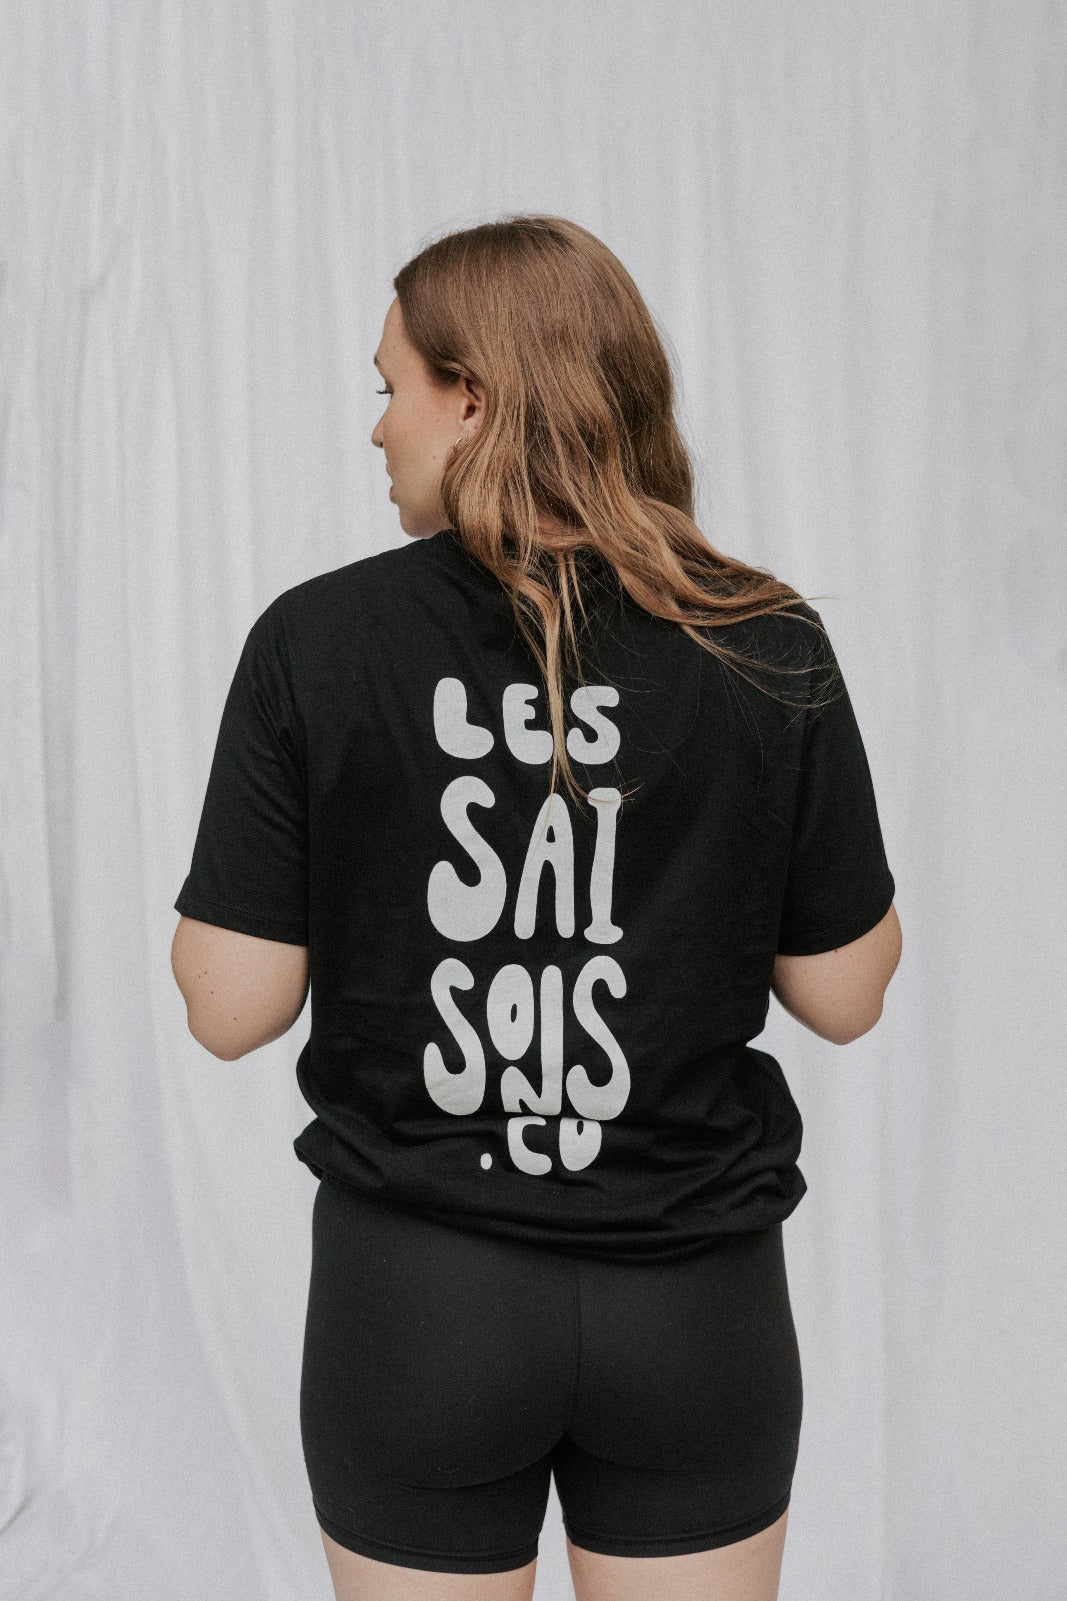 Black shirt, simple logo, les saisons, upcycled, polyester, cotton, comfortable, soft, basic t-shirt, outdoor, lifestyle, everyday, Québec, made in Canada, unisex